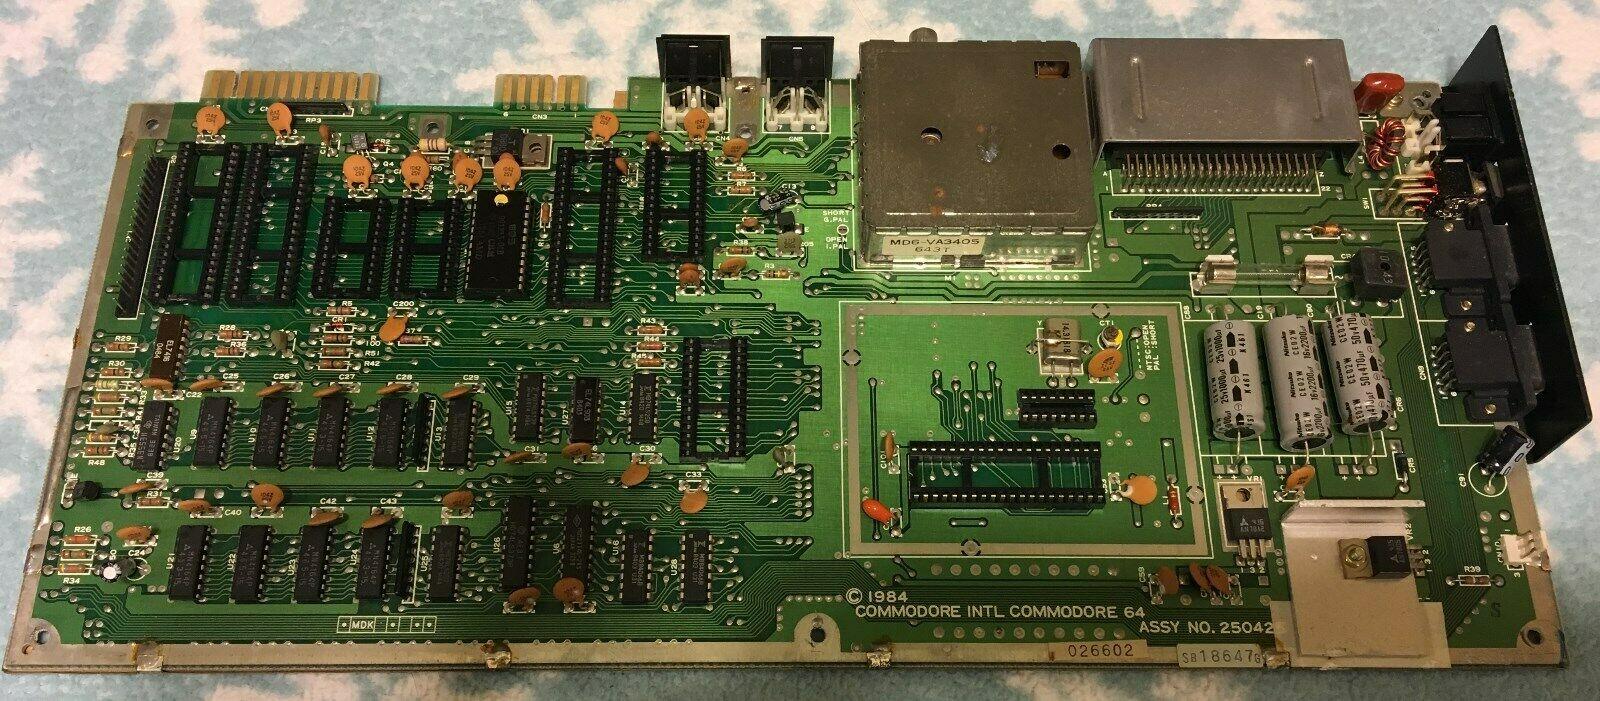 Working Commodore 64 Full Socketed Mainboard 250425 - Comes w/ Character ROM